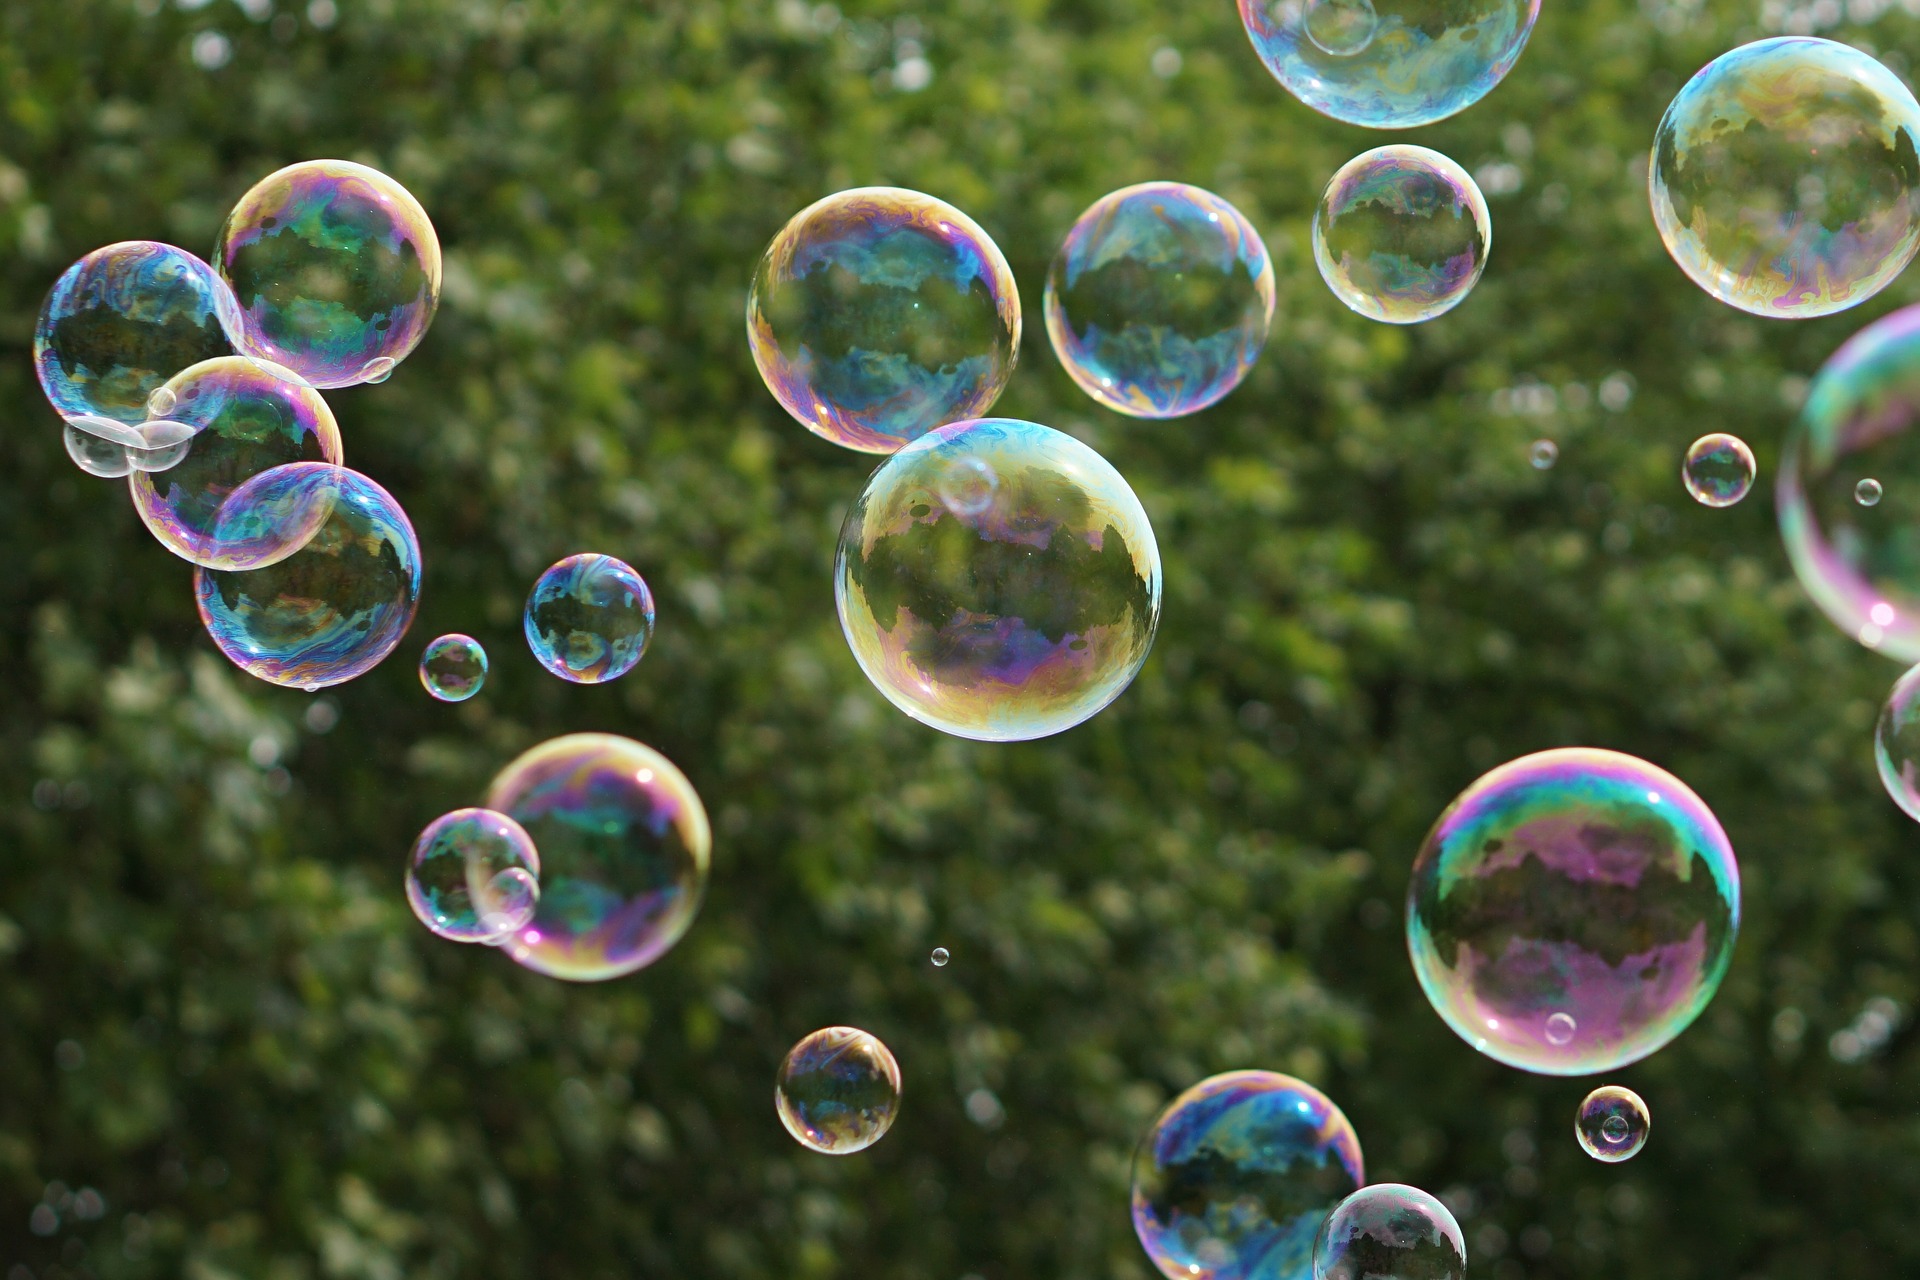 Bubbles floating through the air